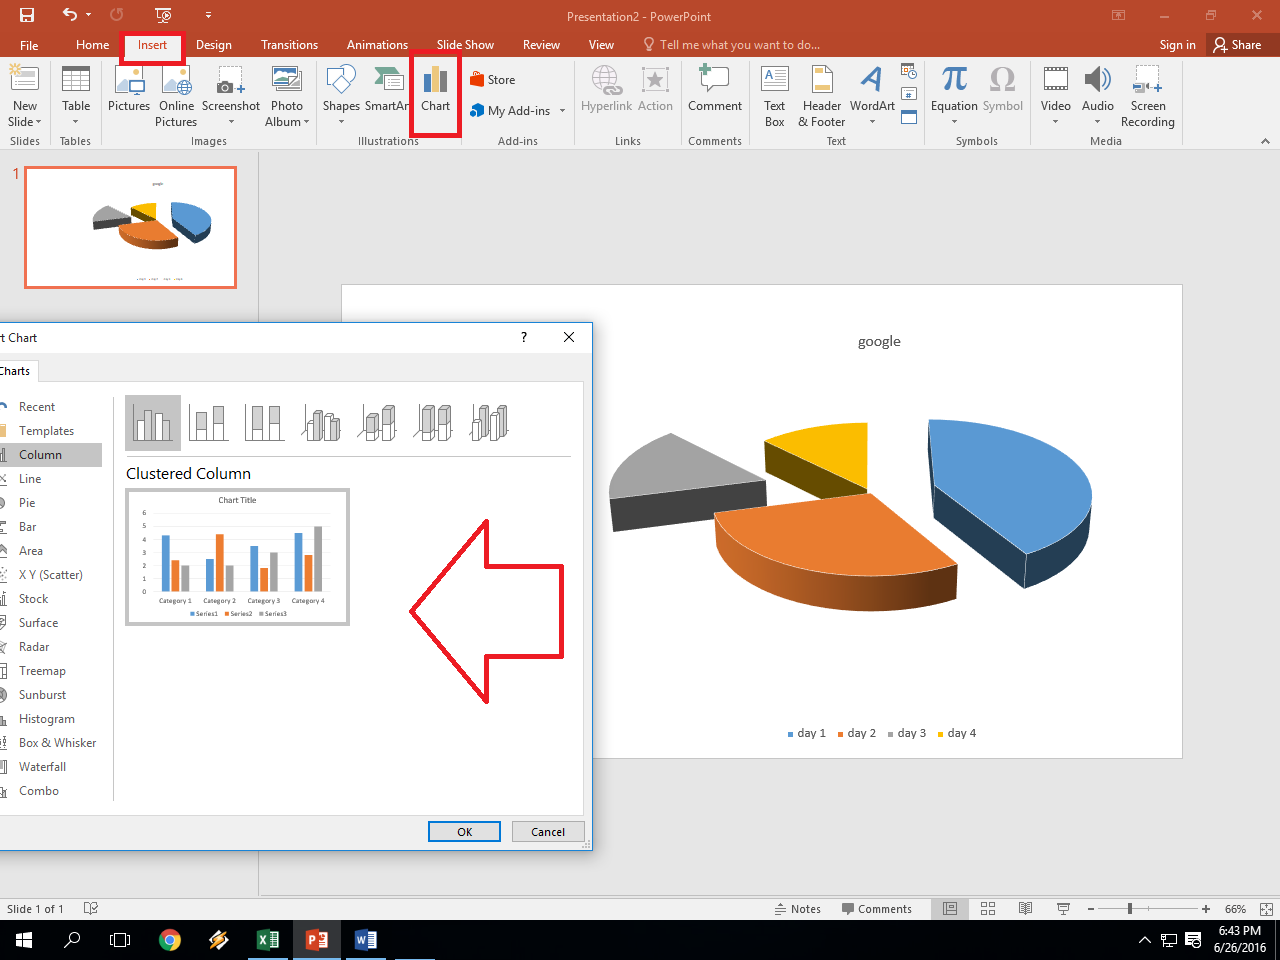 Learn New Things: How to Insert Chart in MS Excel PowerPoint & Word